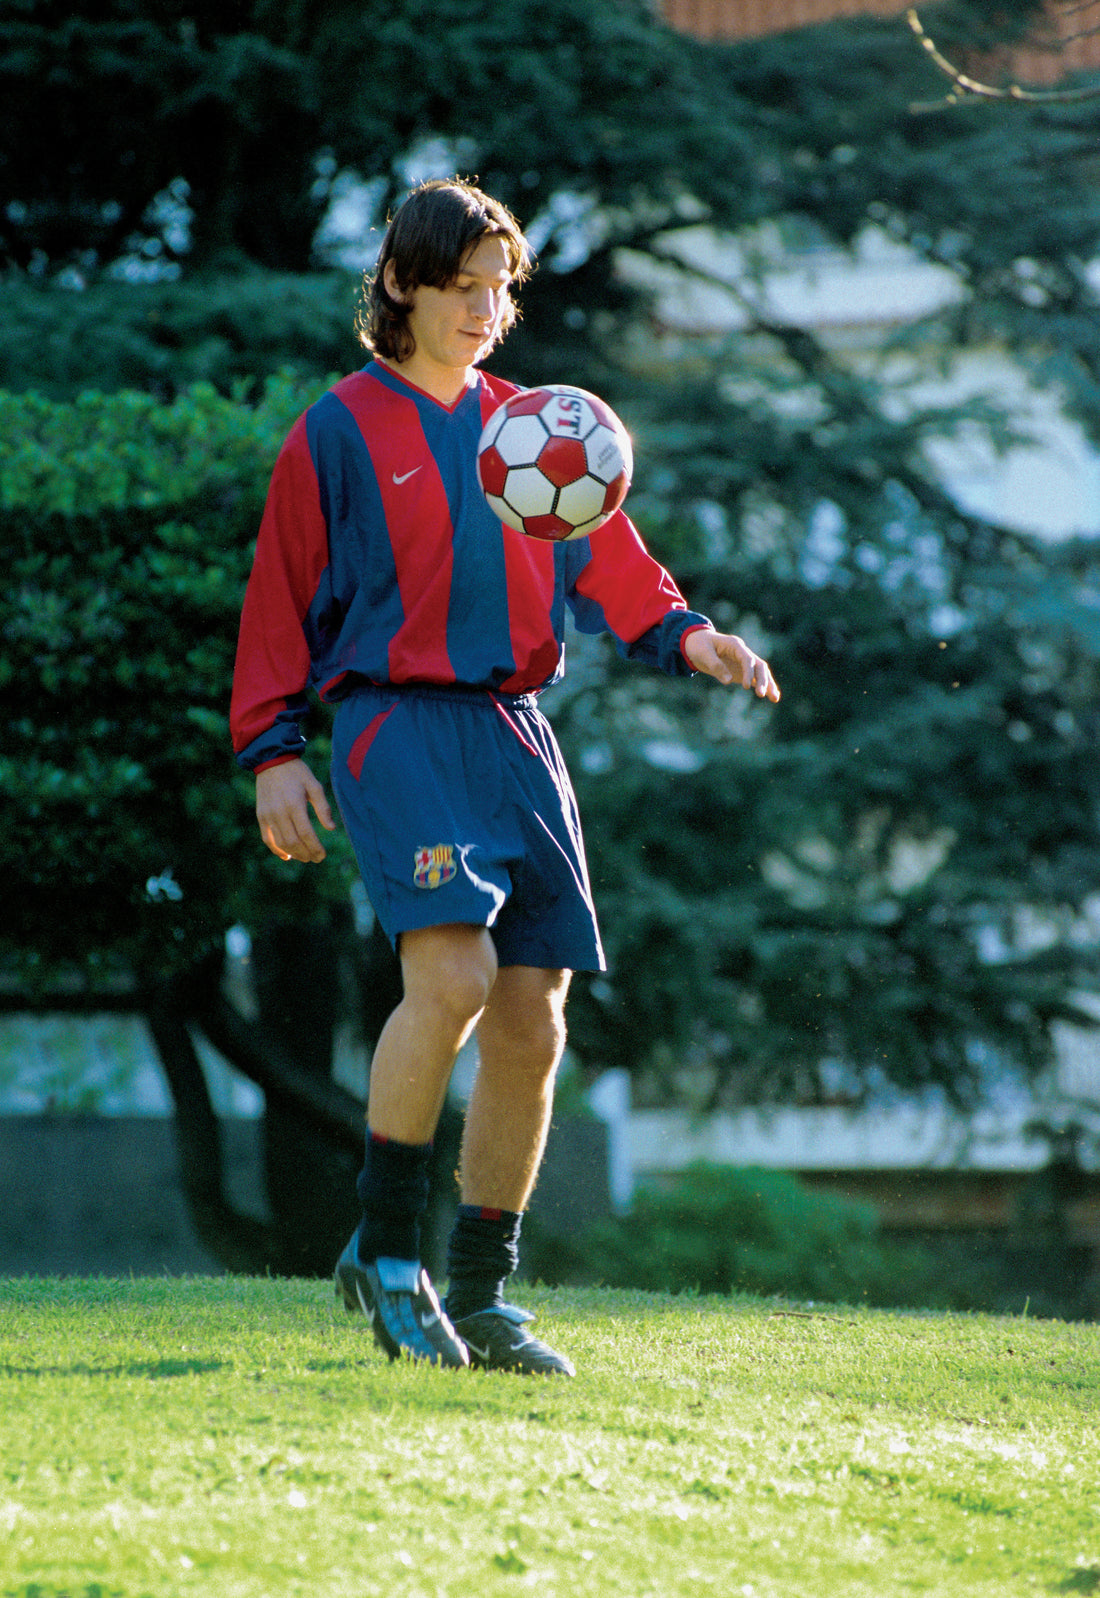 16 YEAR OLD LIONEL MESSI'S MOMENTOUS 2003/04 SEASON